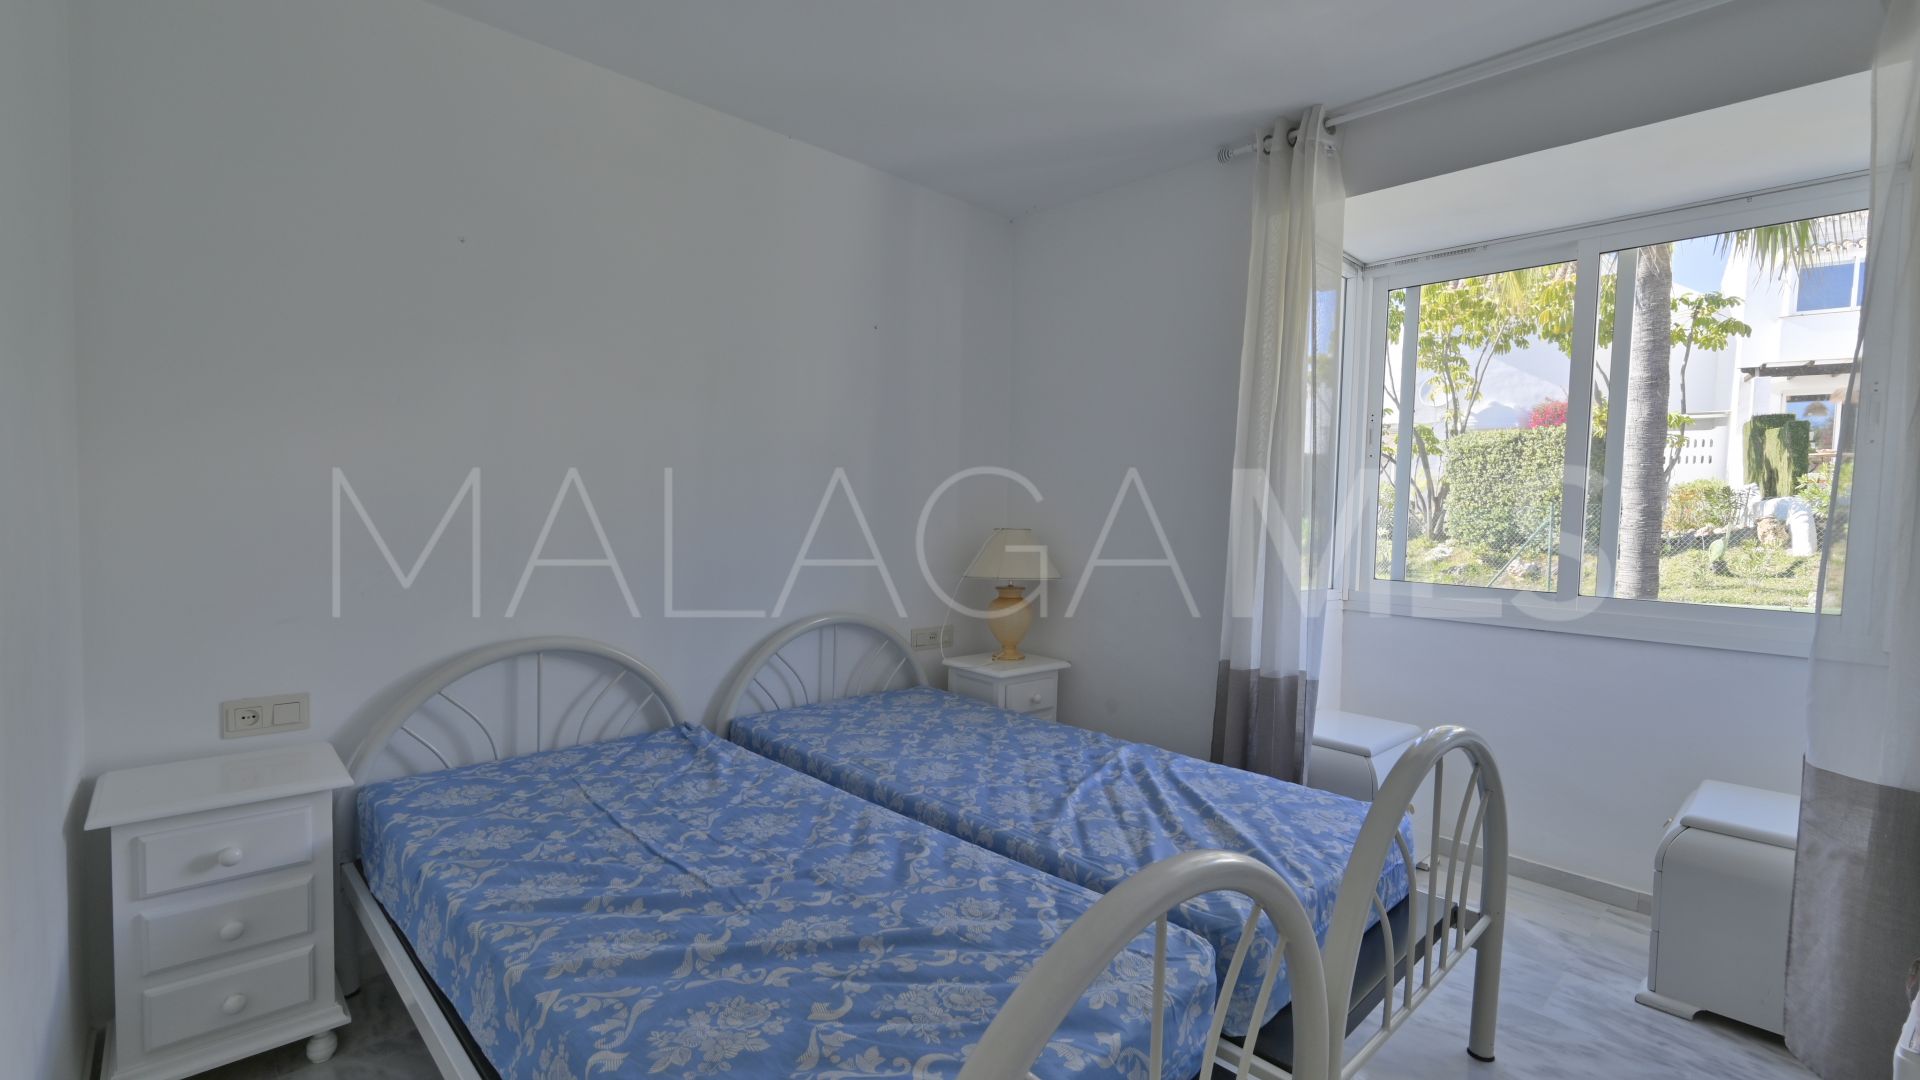 Town house with 2 bedrooms for sale in Riviera del Sol